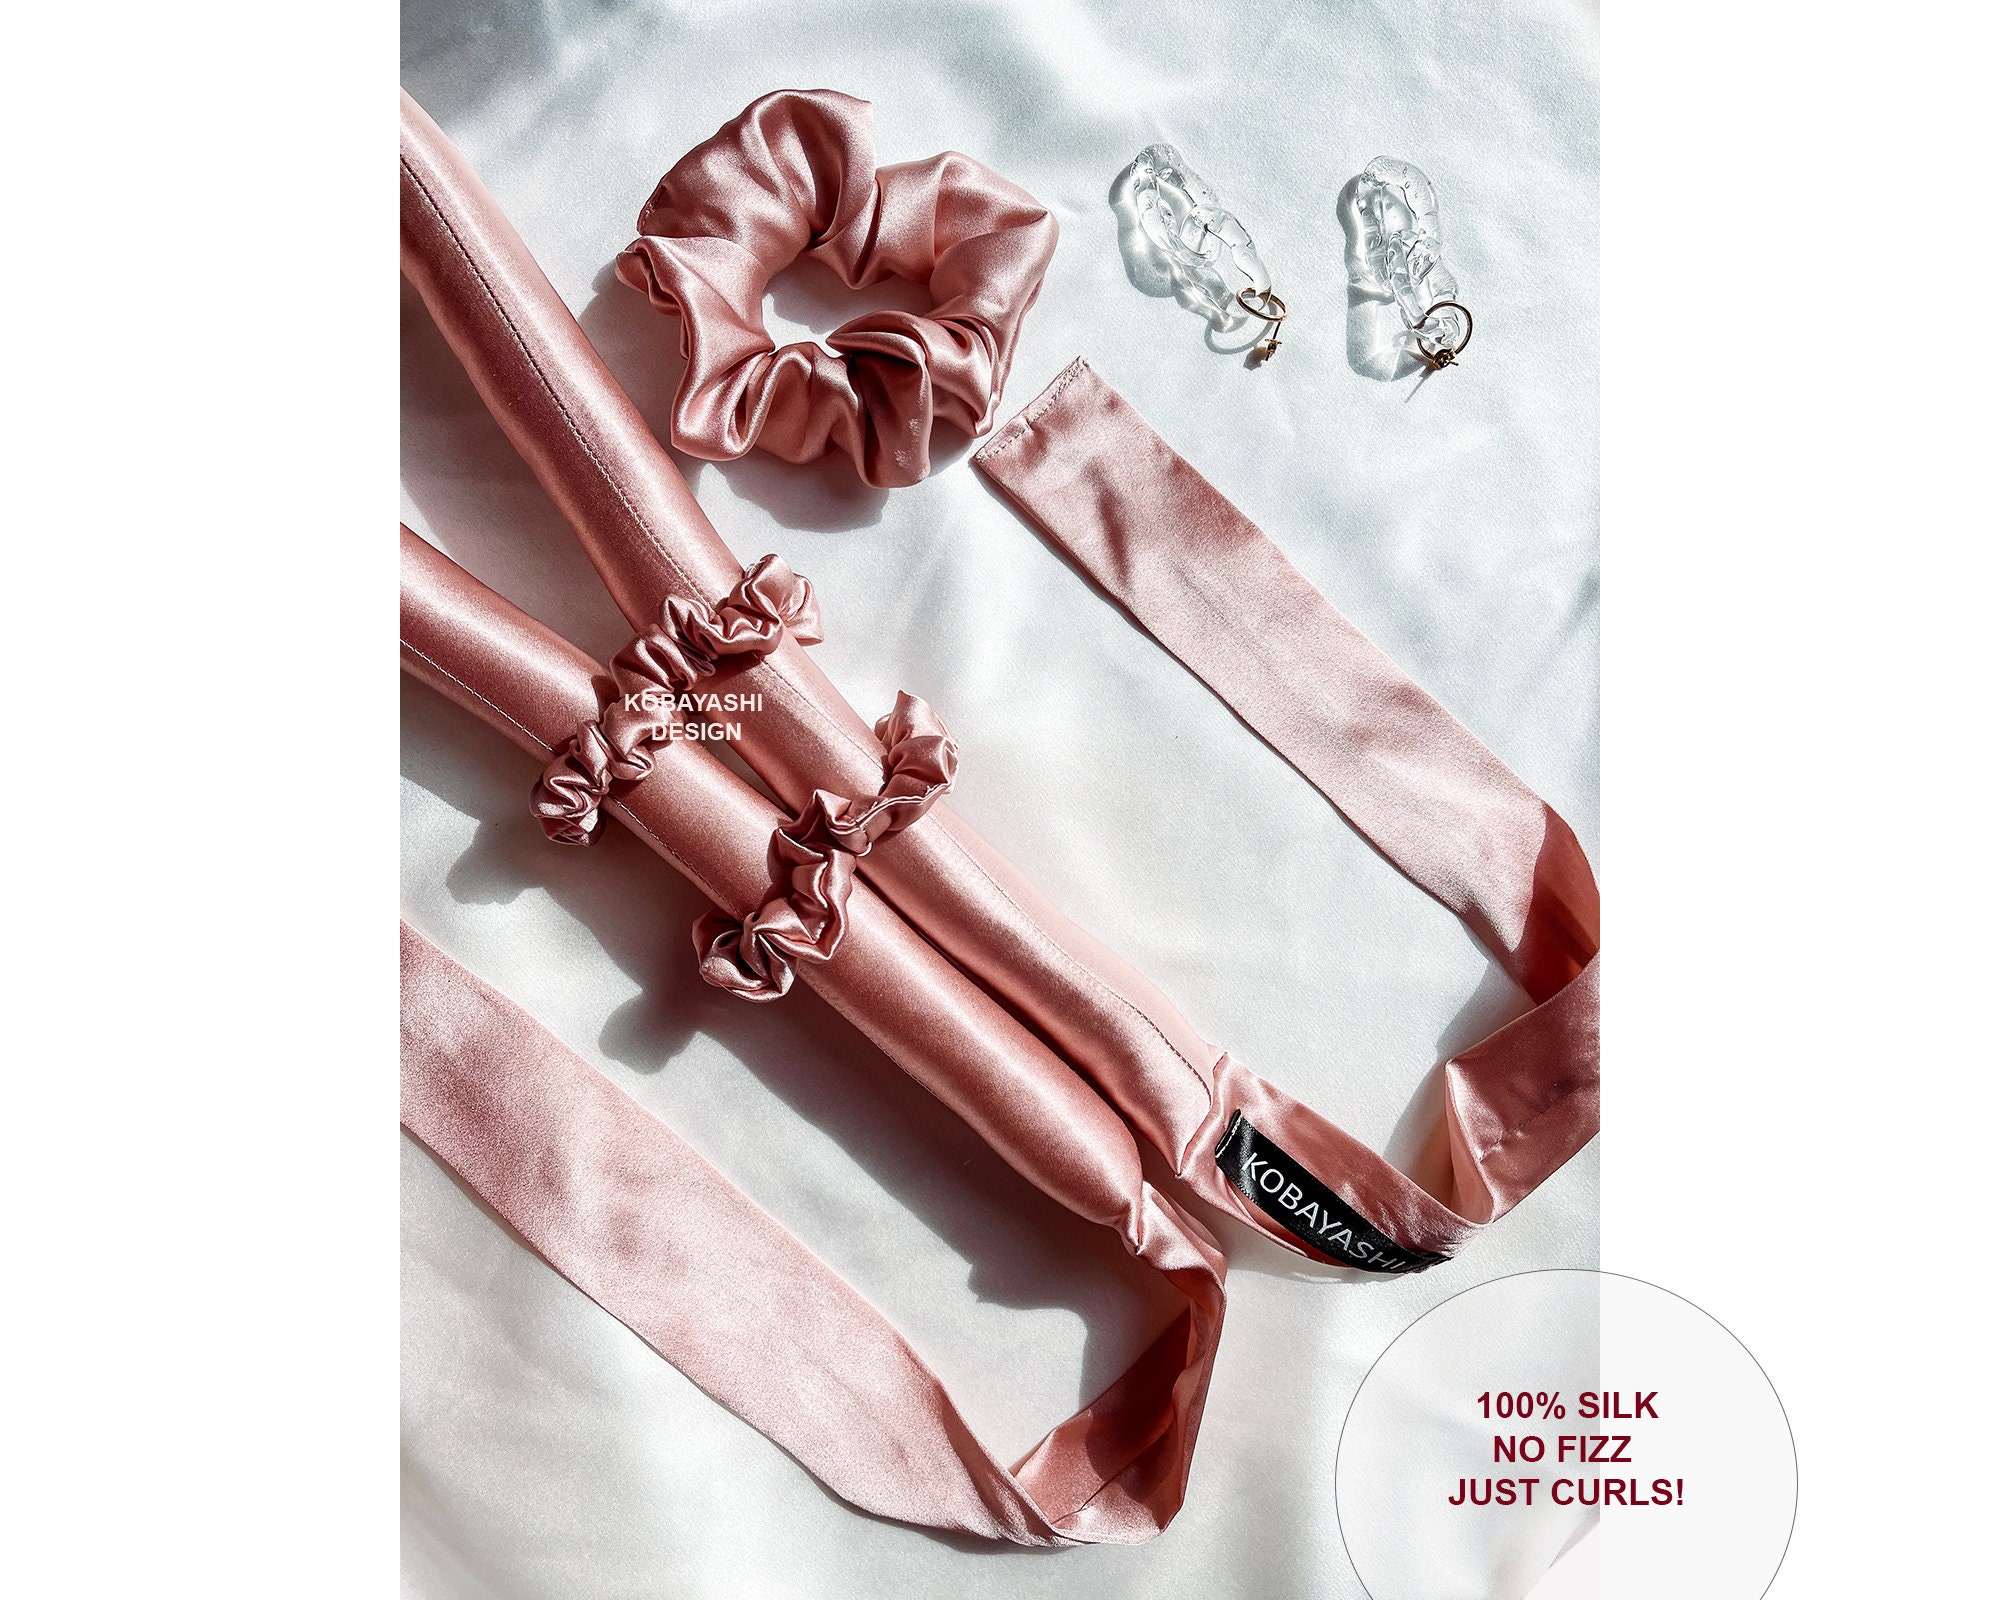 PP Pink Curling Ribbon Kit Limited Edition - Heatless Hair